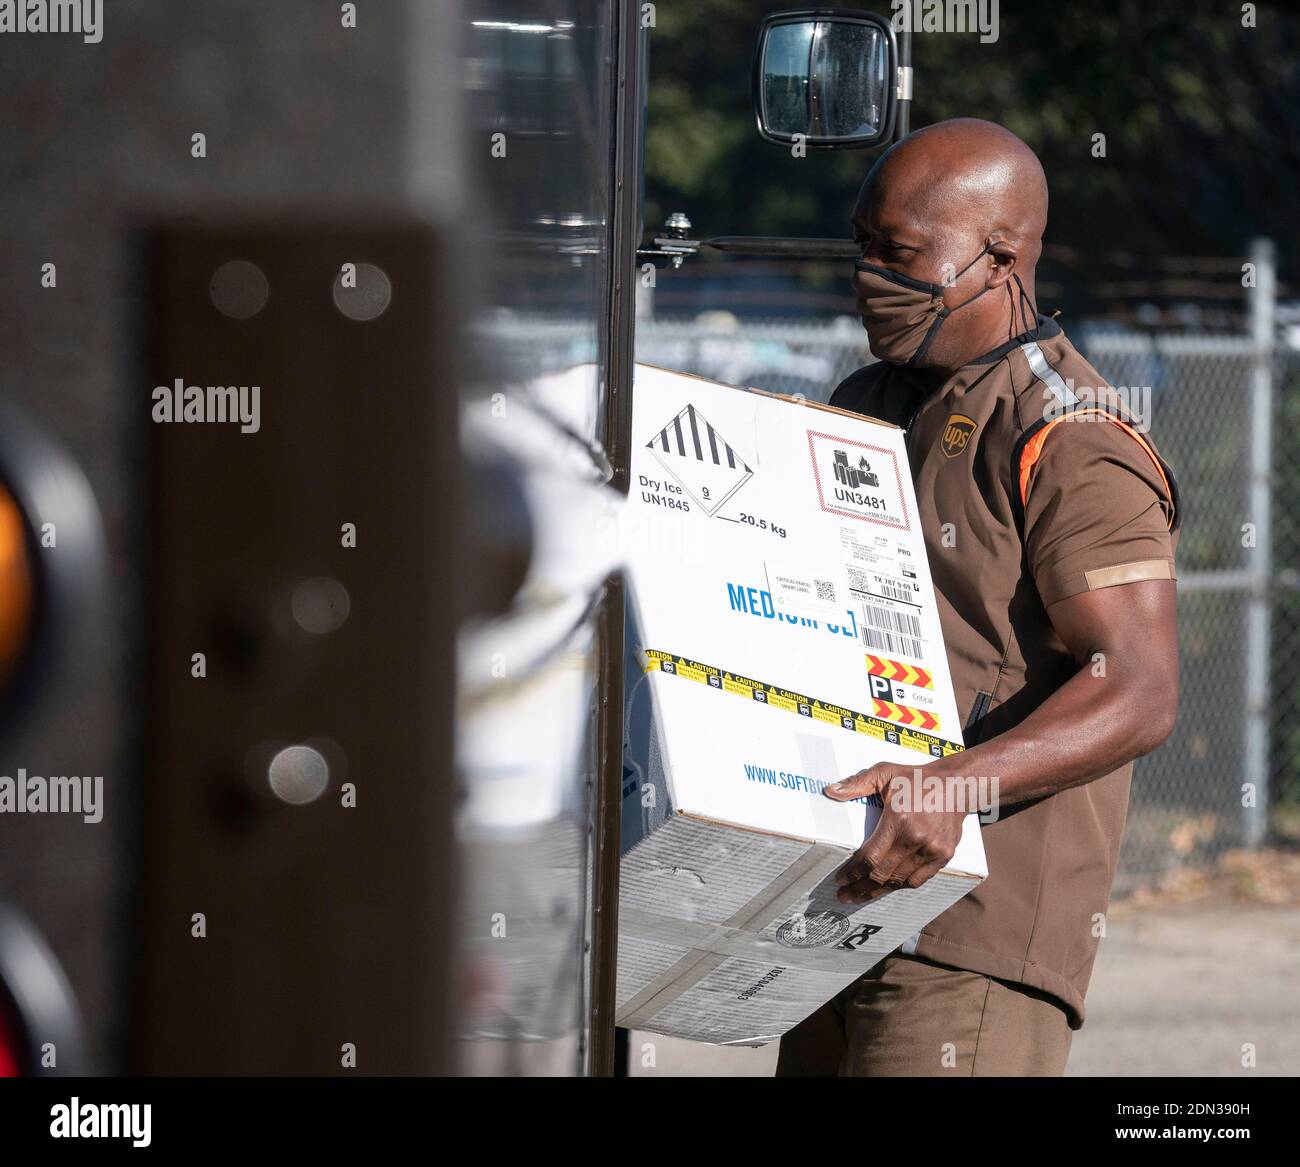 Austin, TX USA December 17, 2020: UPS driver Cornelius Littlejohn carries a box with 5,000 doses of vaccine during a press conference at a UPS facility where Texas officials touted the arrival of the state's first shipments of the Pfizer BioNTech anti-coronavirus vaccine. Thousands of Texans are expected to be vaccinated over the coming days. Credit: Bob Daemmrich/Alamy Live News Stock Photo